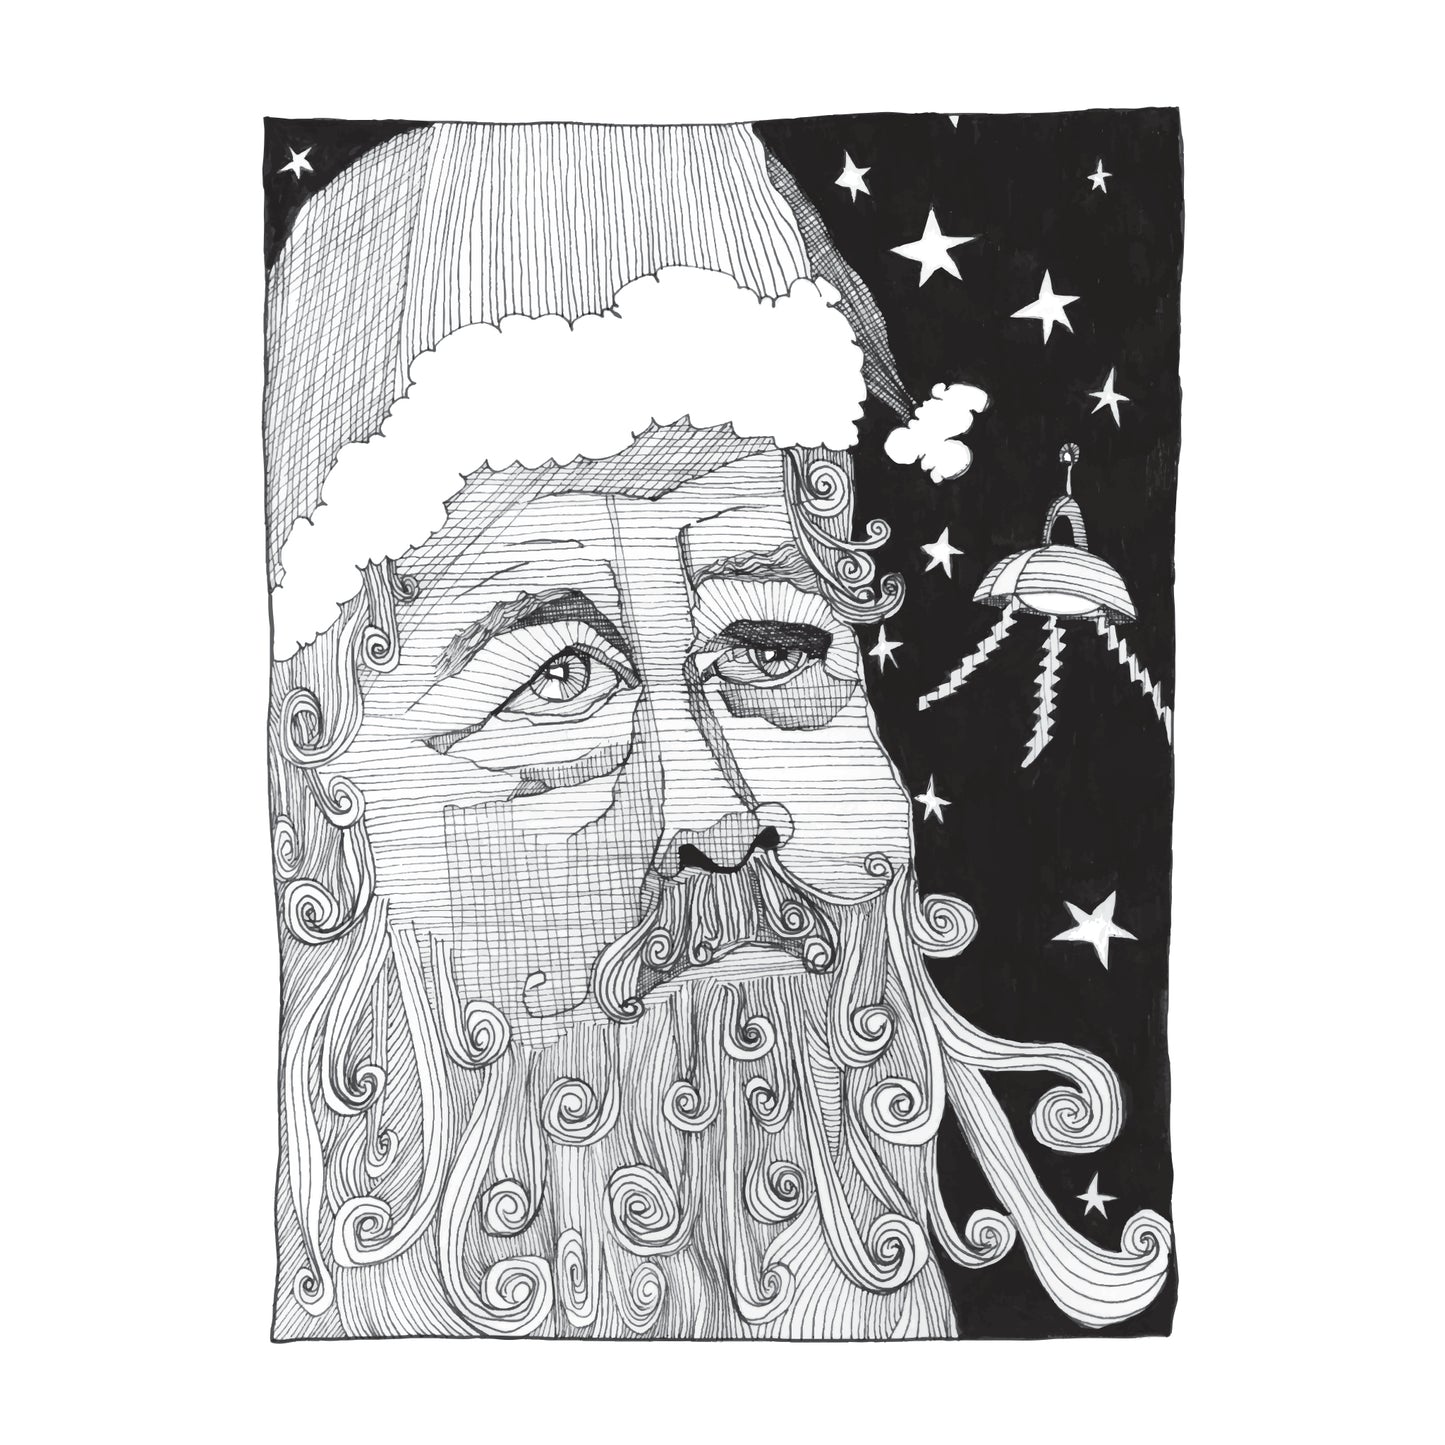 black and white illustration of Santa Claus staring peacefully at a spaceship on a starry night